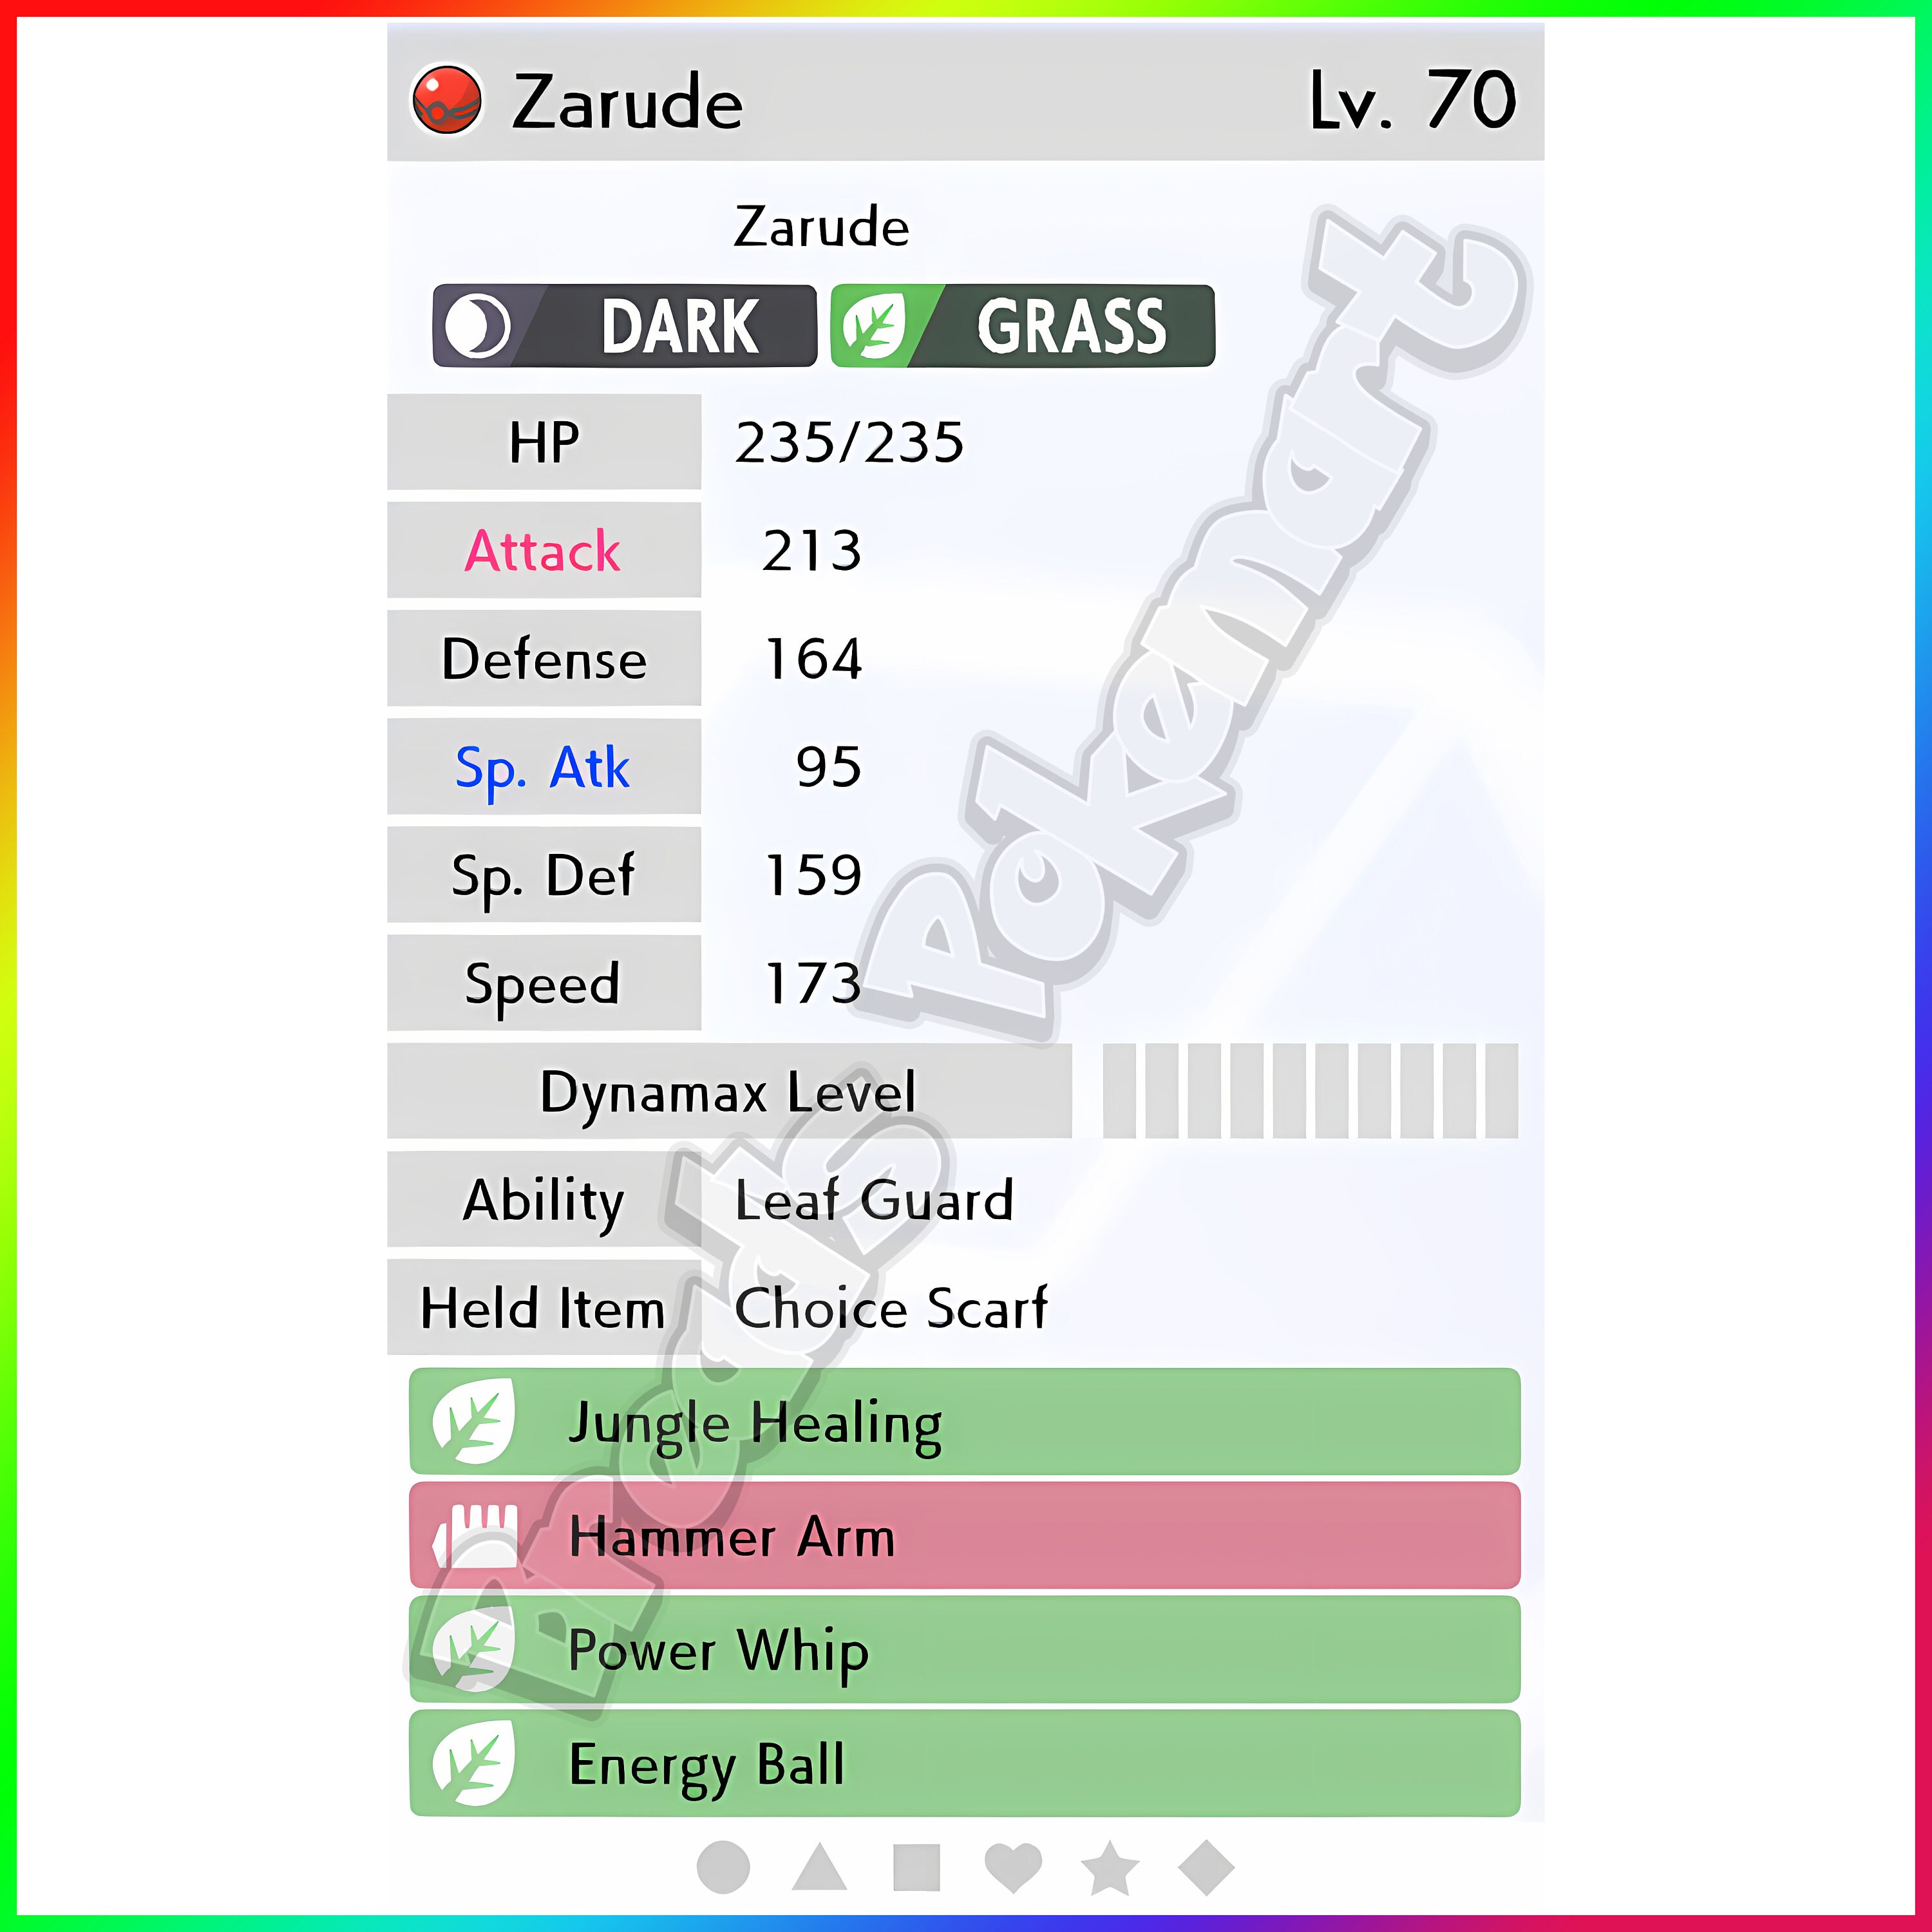 ZARUDE Dada Scarf Form EVENT Mythical // Pokemon Sword and 